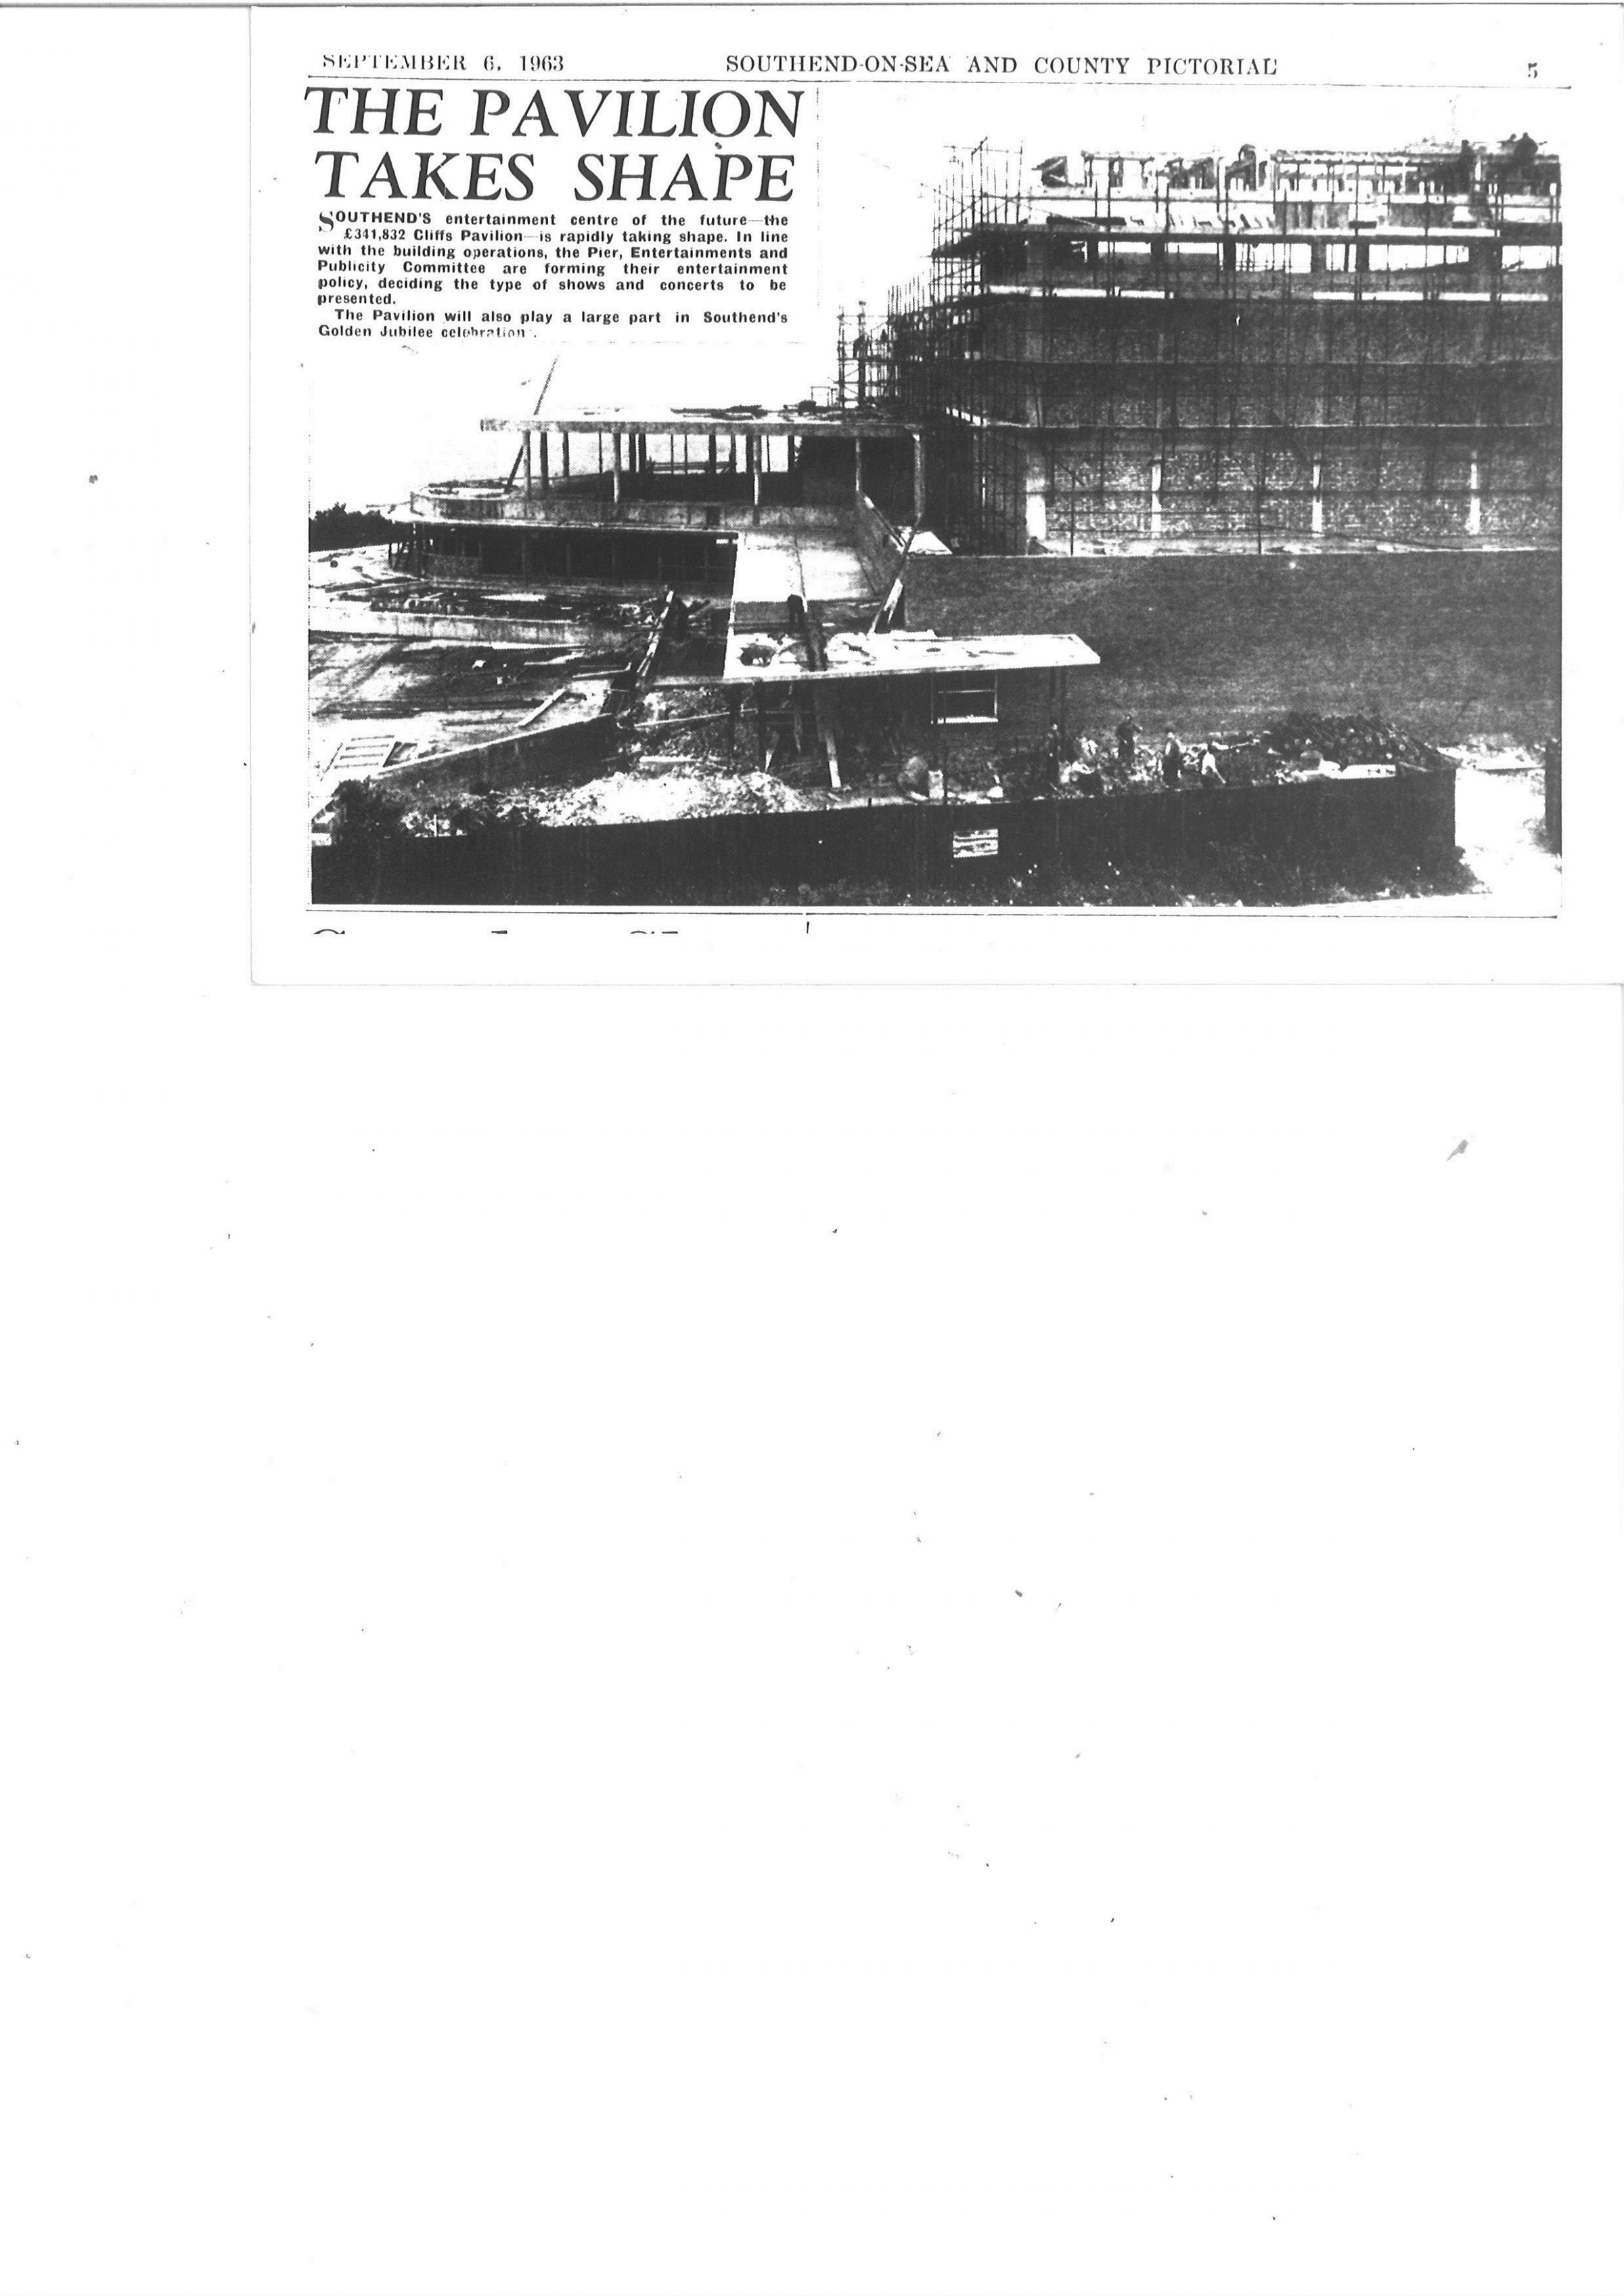 Construction - this newspaper article, dated September 6, 1963, shows Cliffs Pavilion taking shape